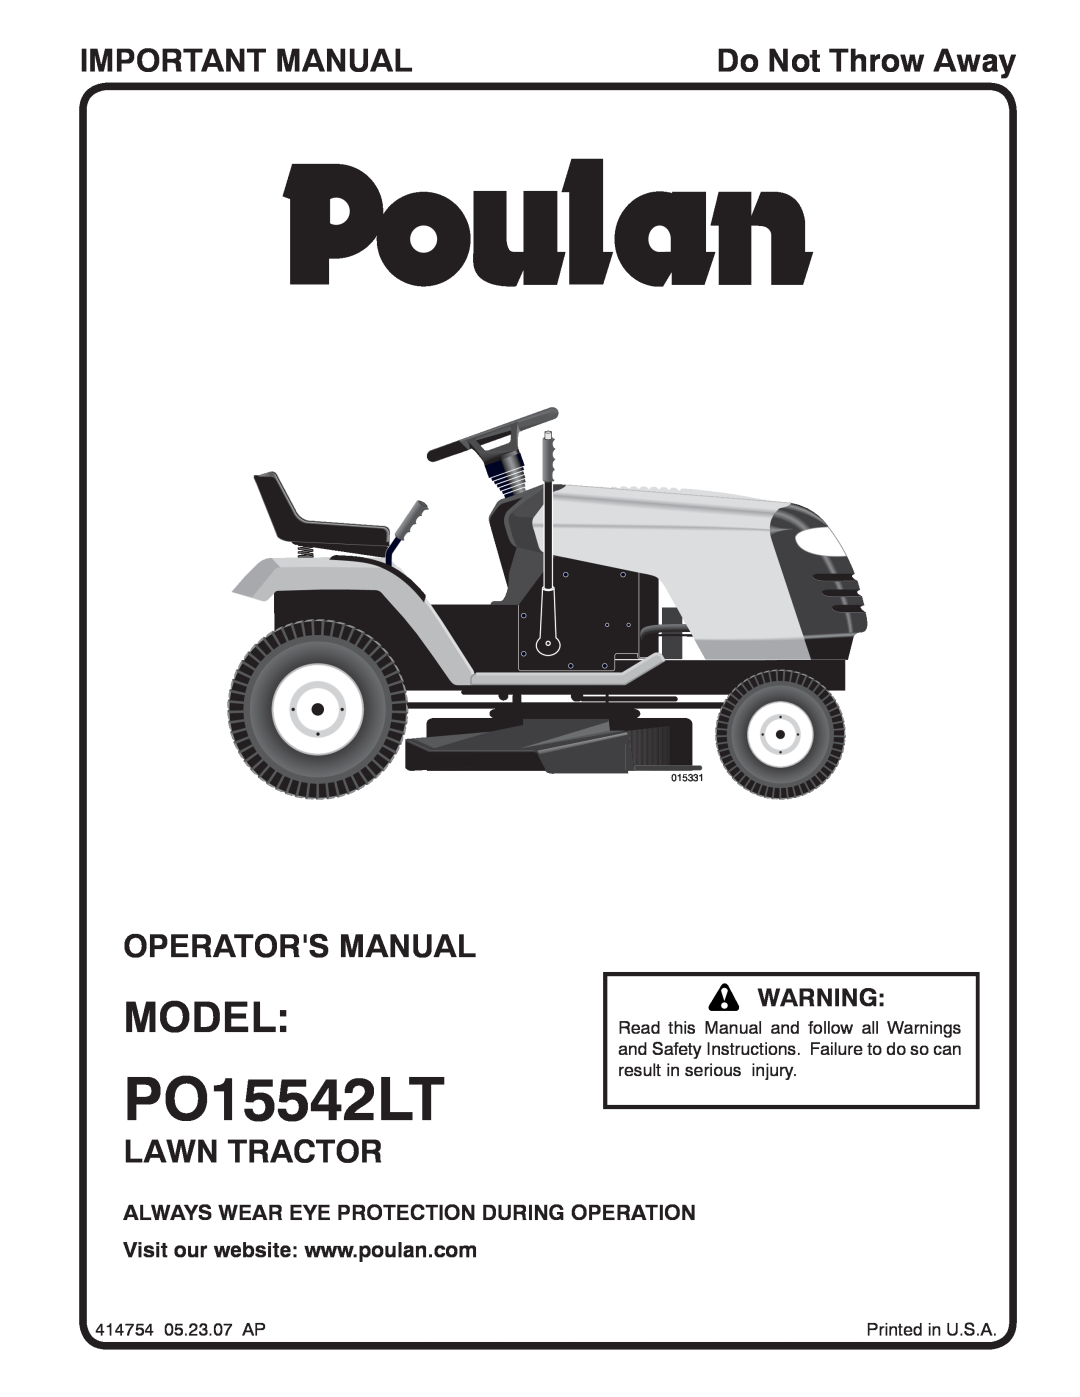 Poulan 414754 manual Model, Important Manual, Operators Manual, Lawn Tractor, Do Not Throw Away, PO15542LT, 015331 